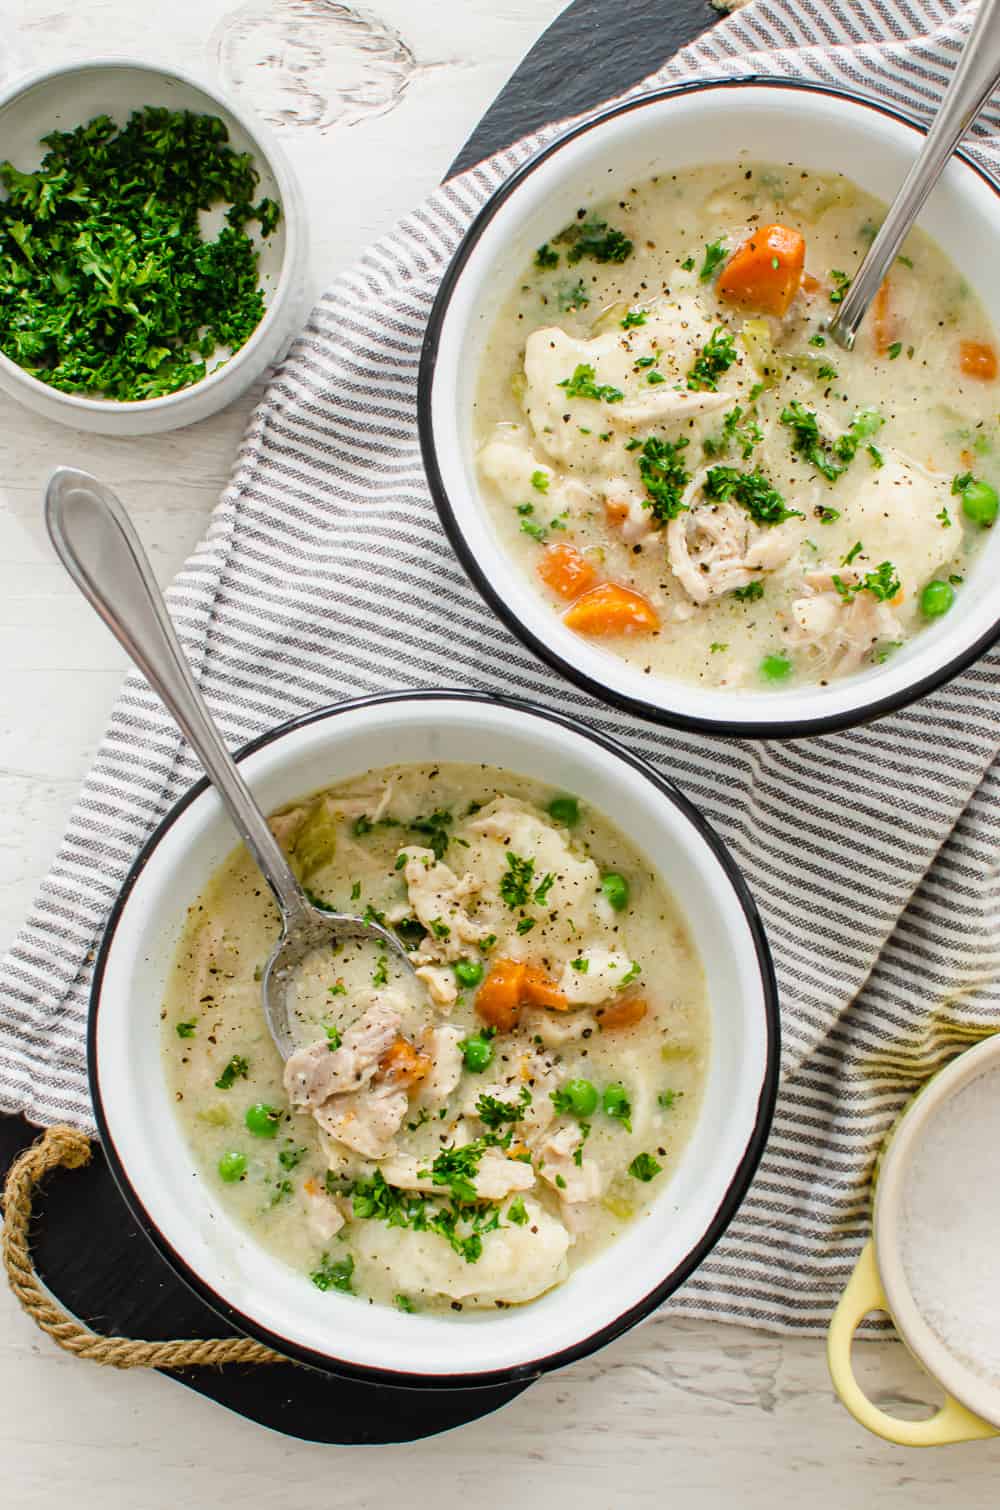 Two bowls of chicken and dumplings.